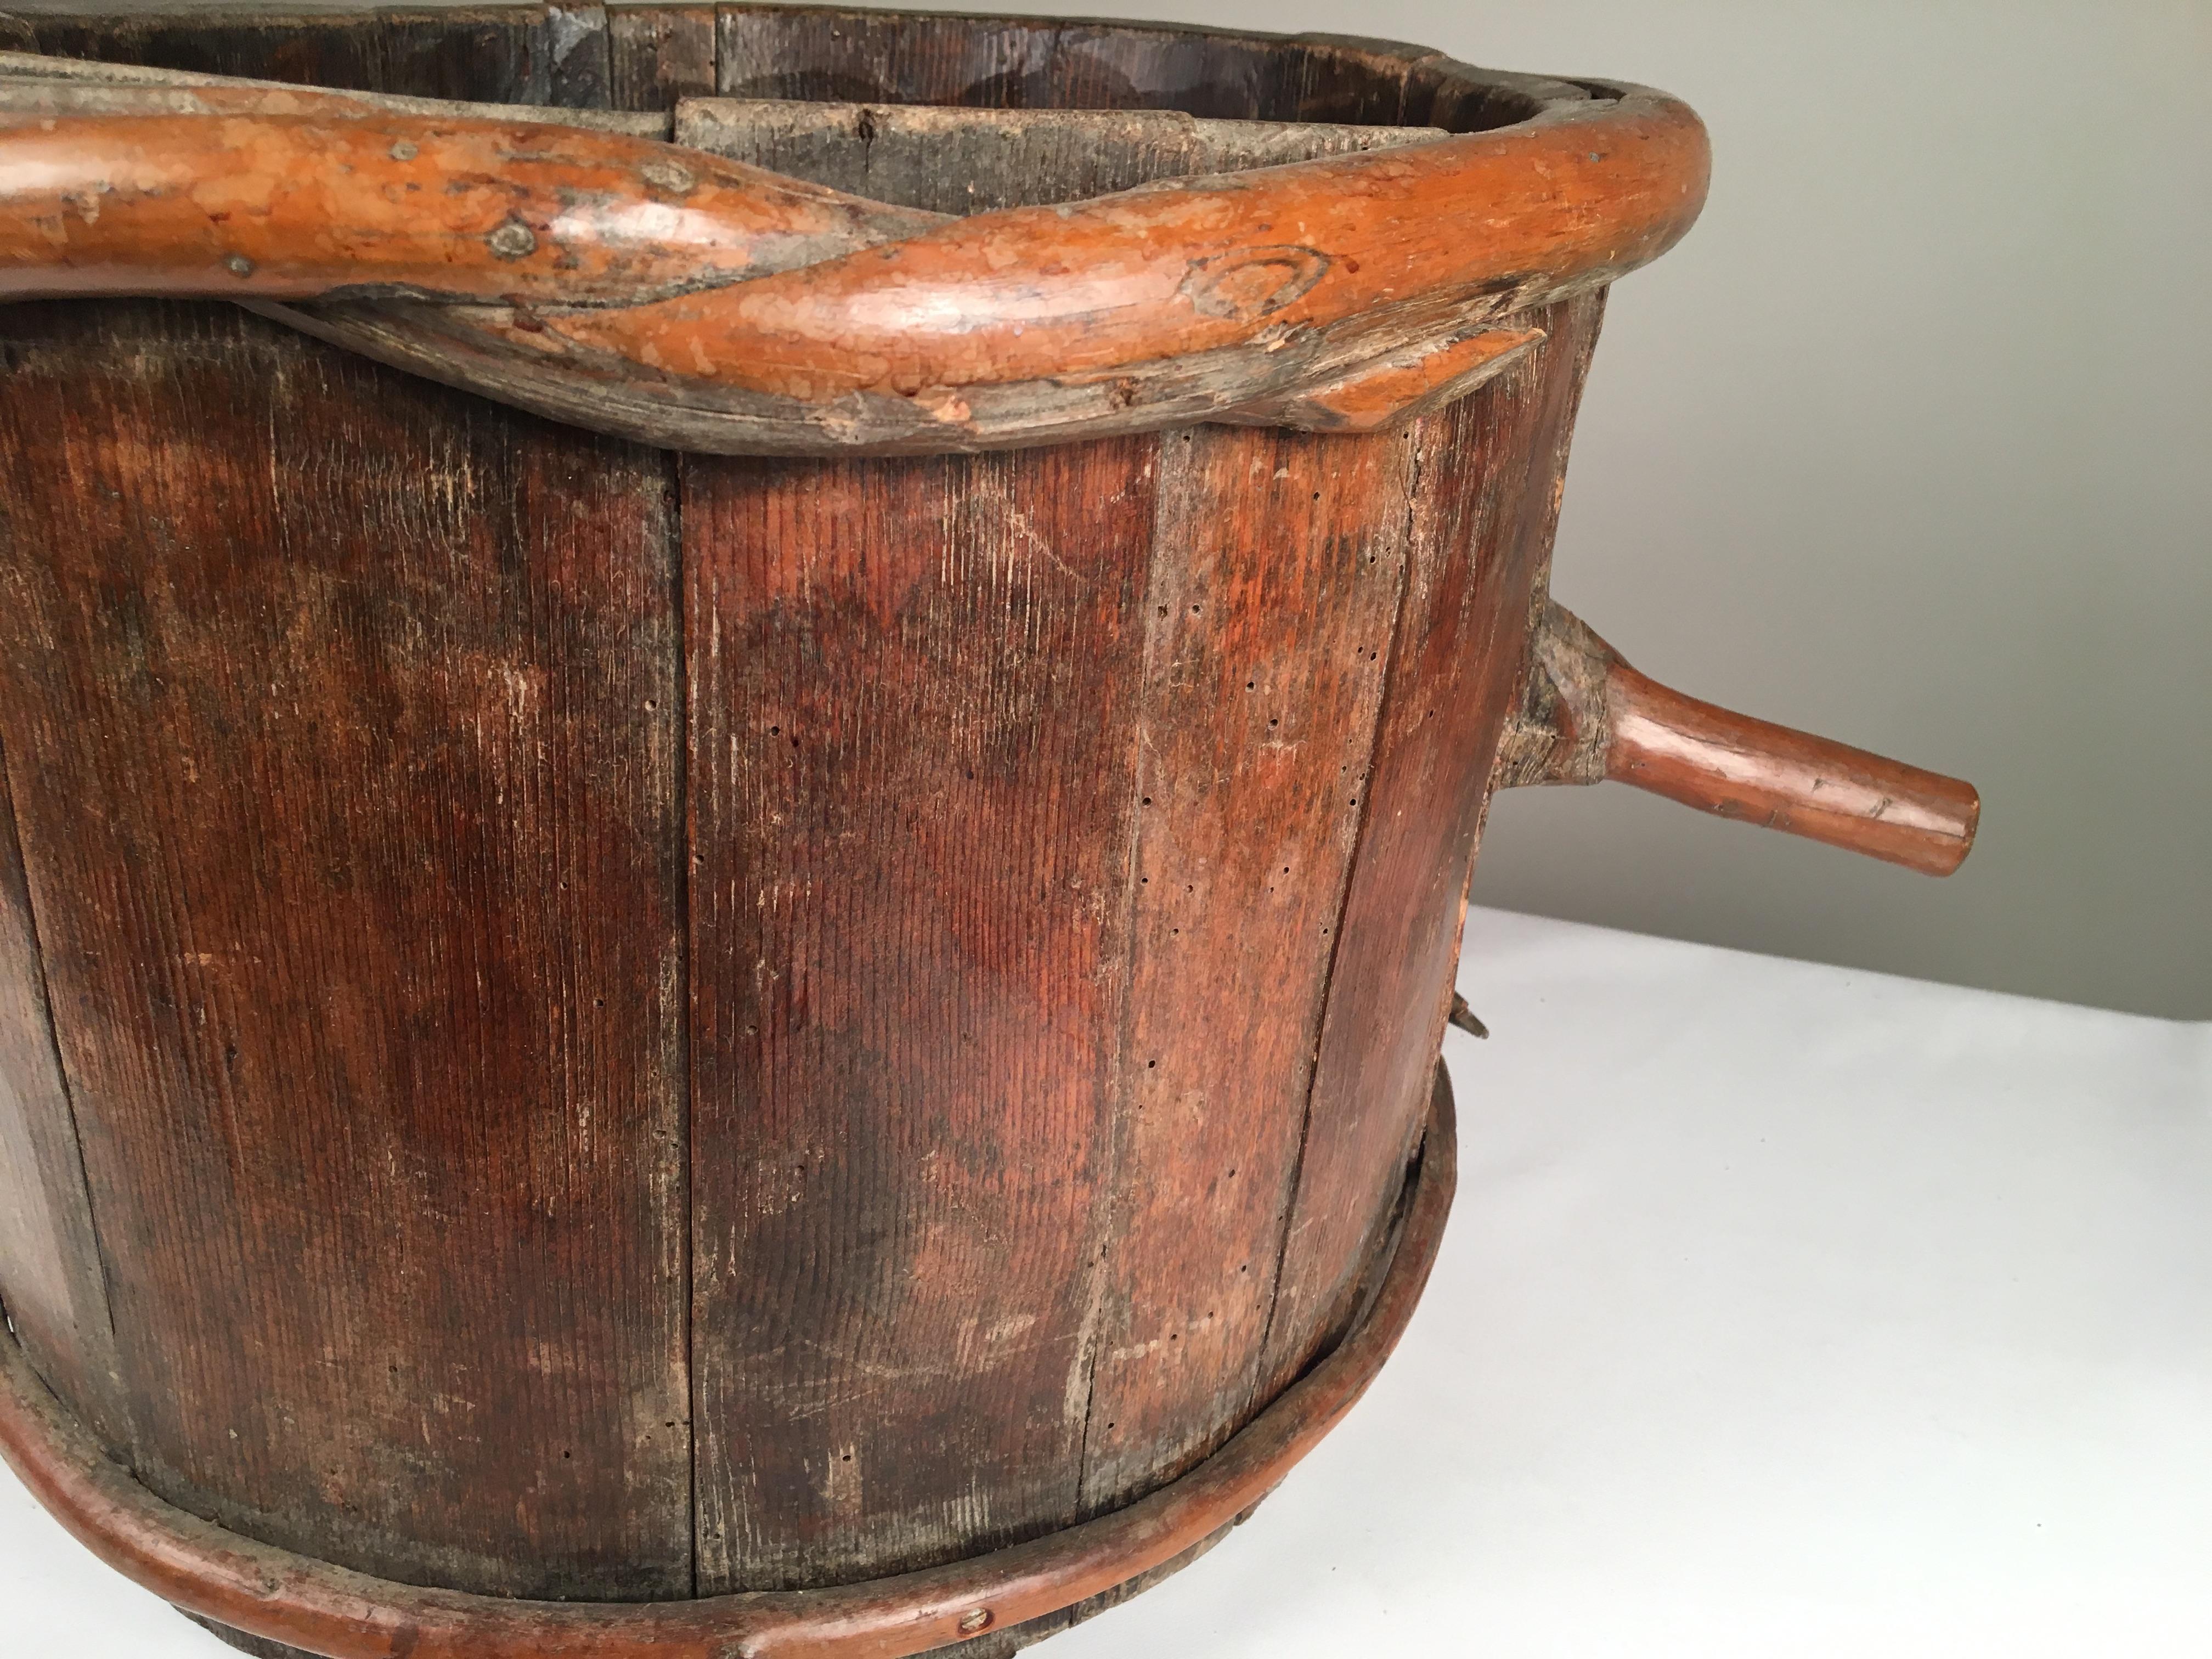 Hand-Crafted Primitive Wood Water Bucket, French, 18th Century